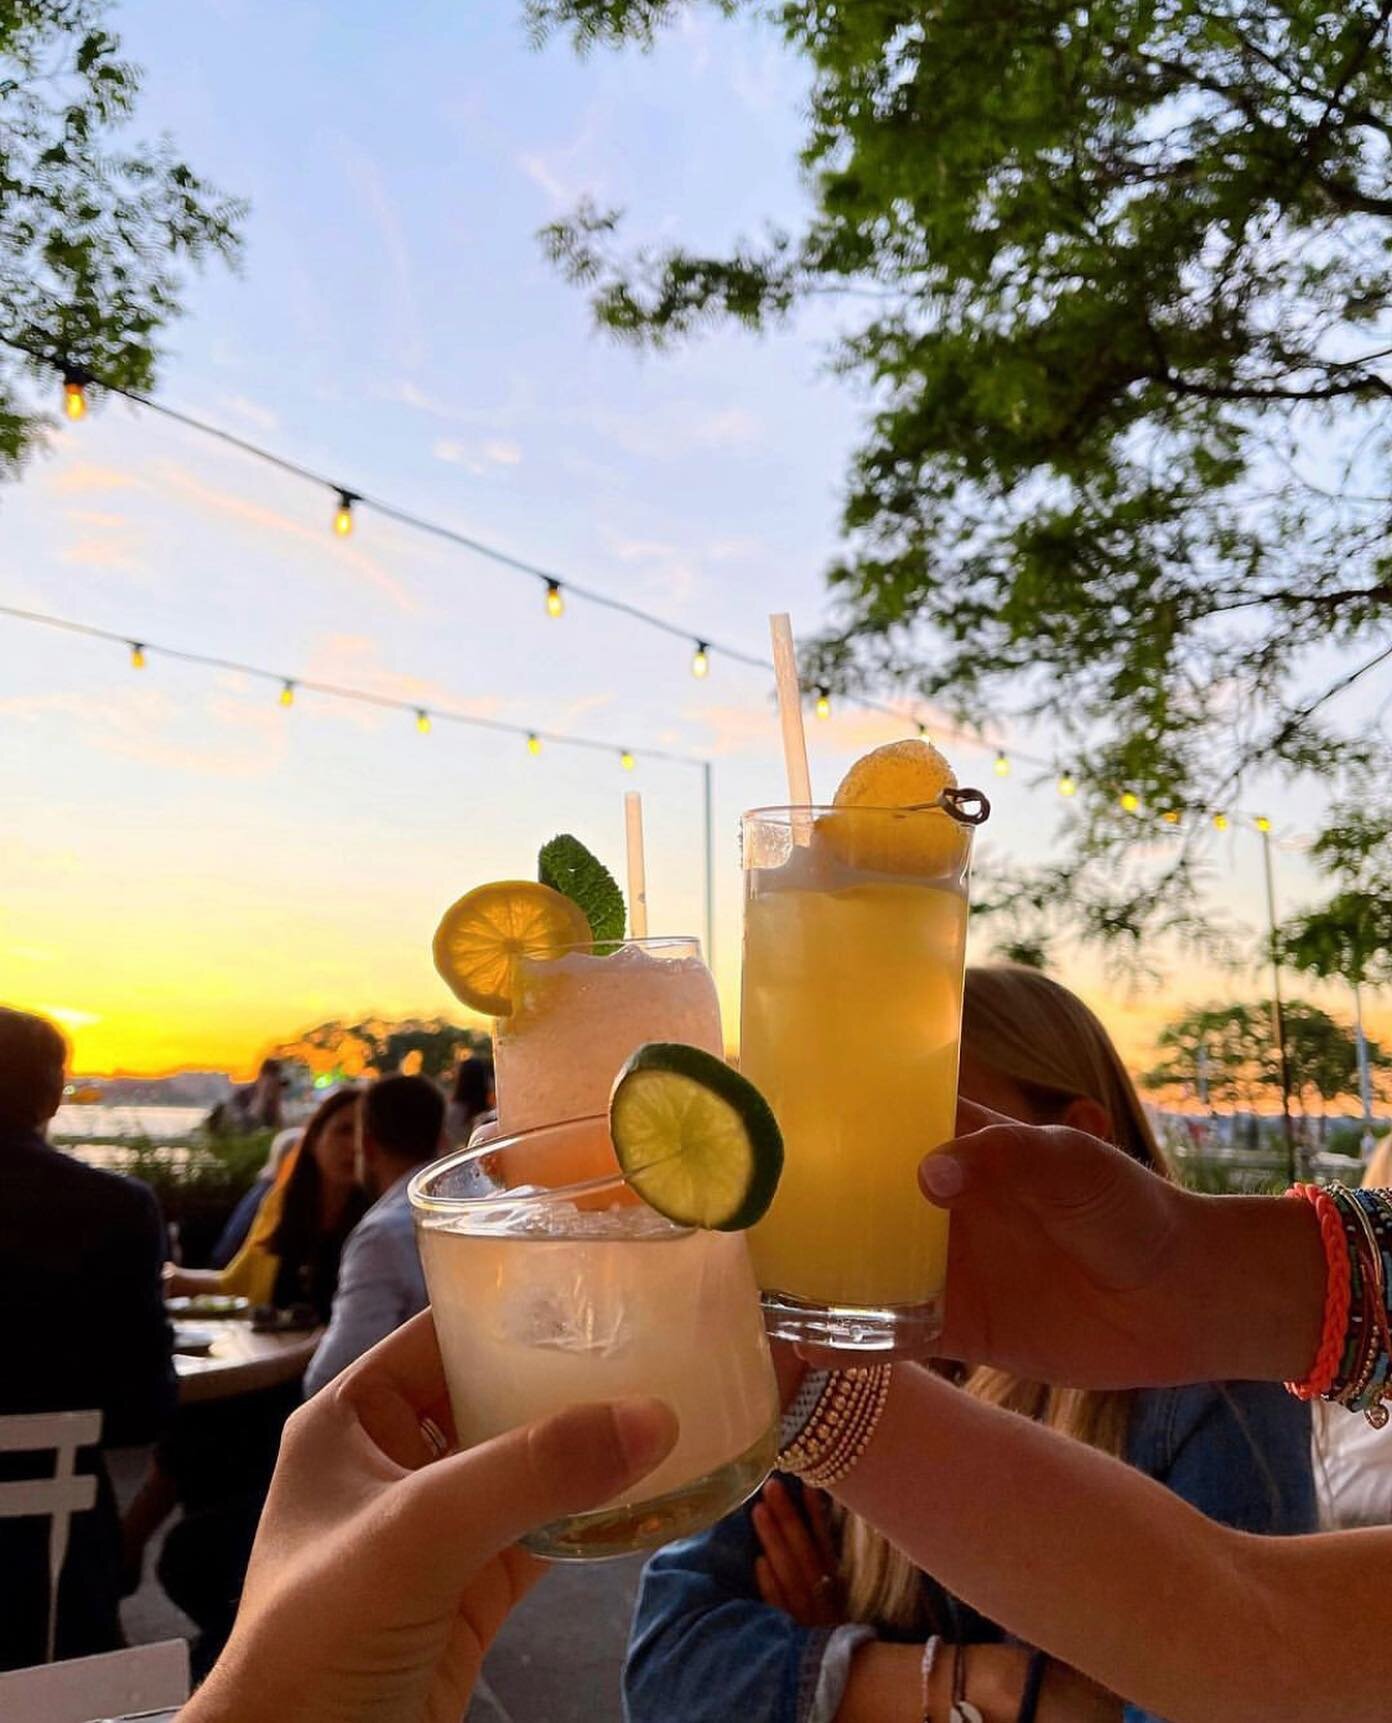 Cocktails at sunset 
Via @buzzed__nyc